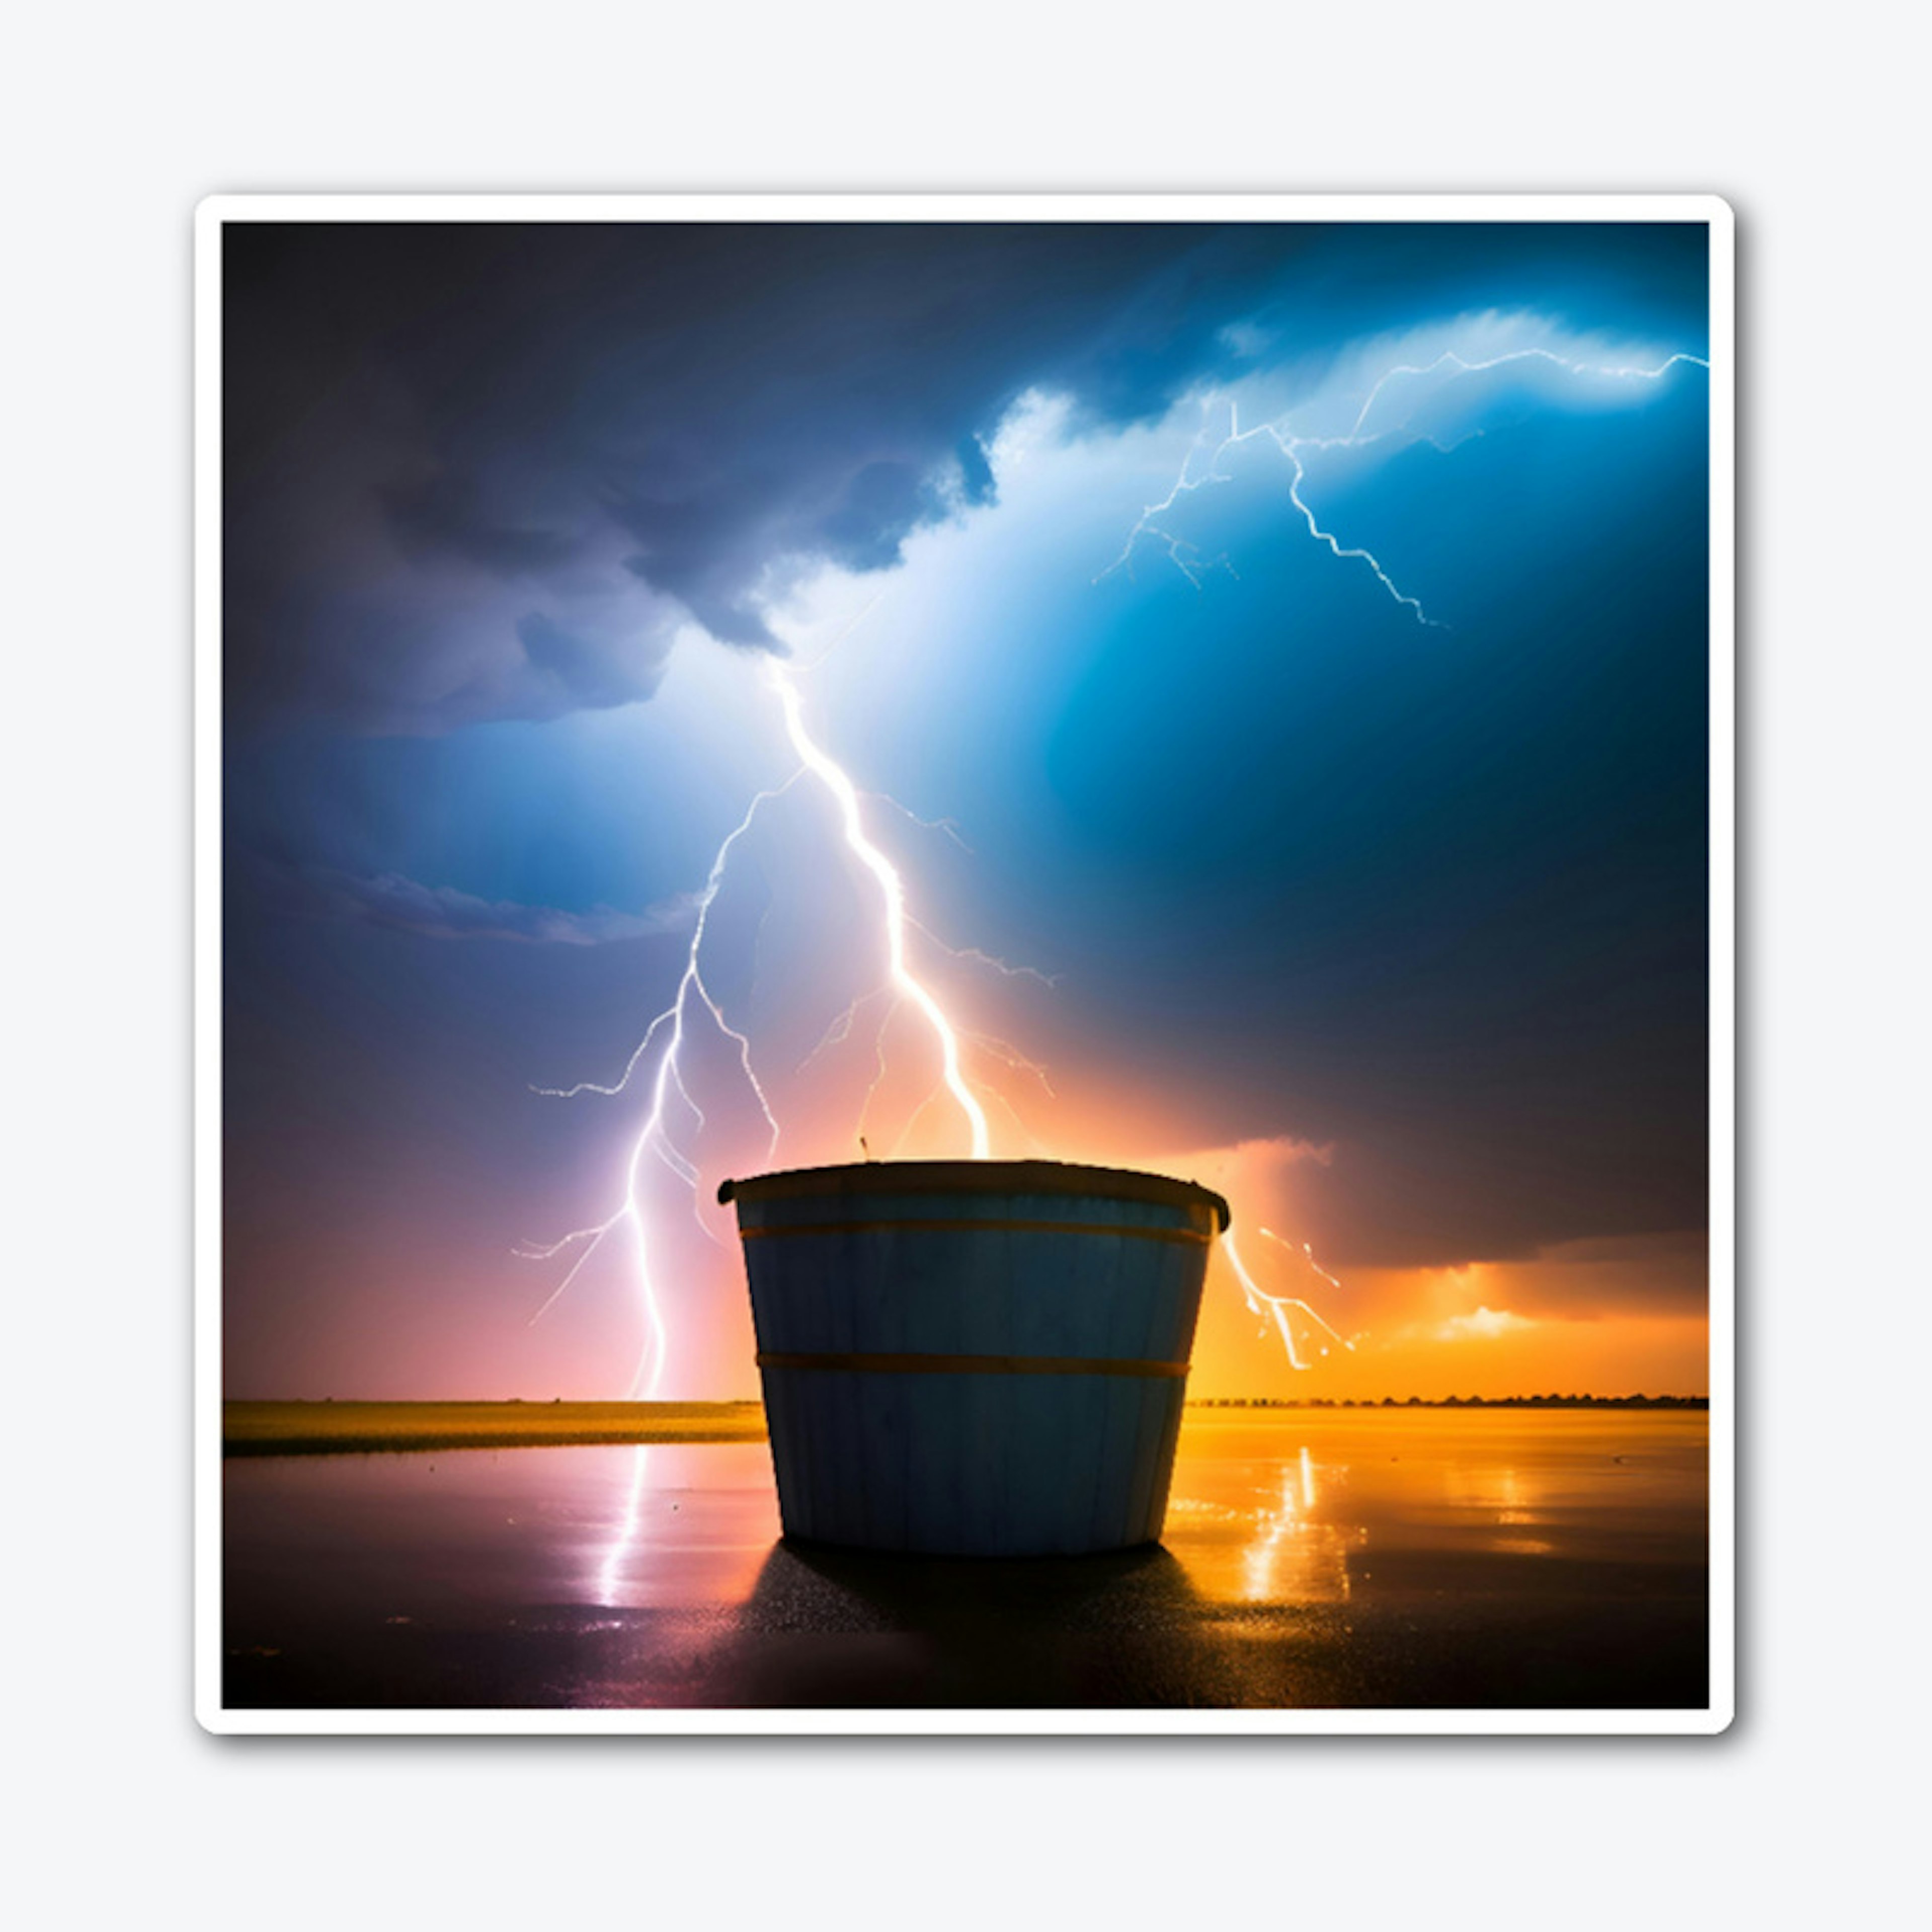 A bucket collecting lightning